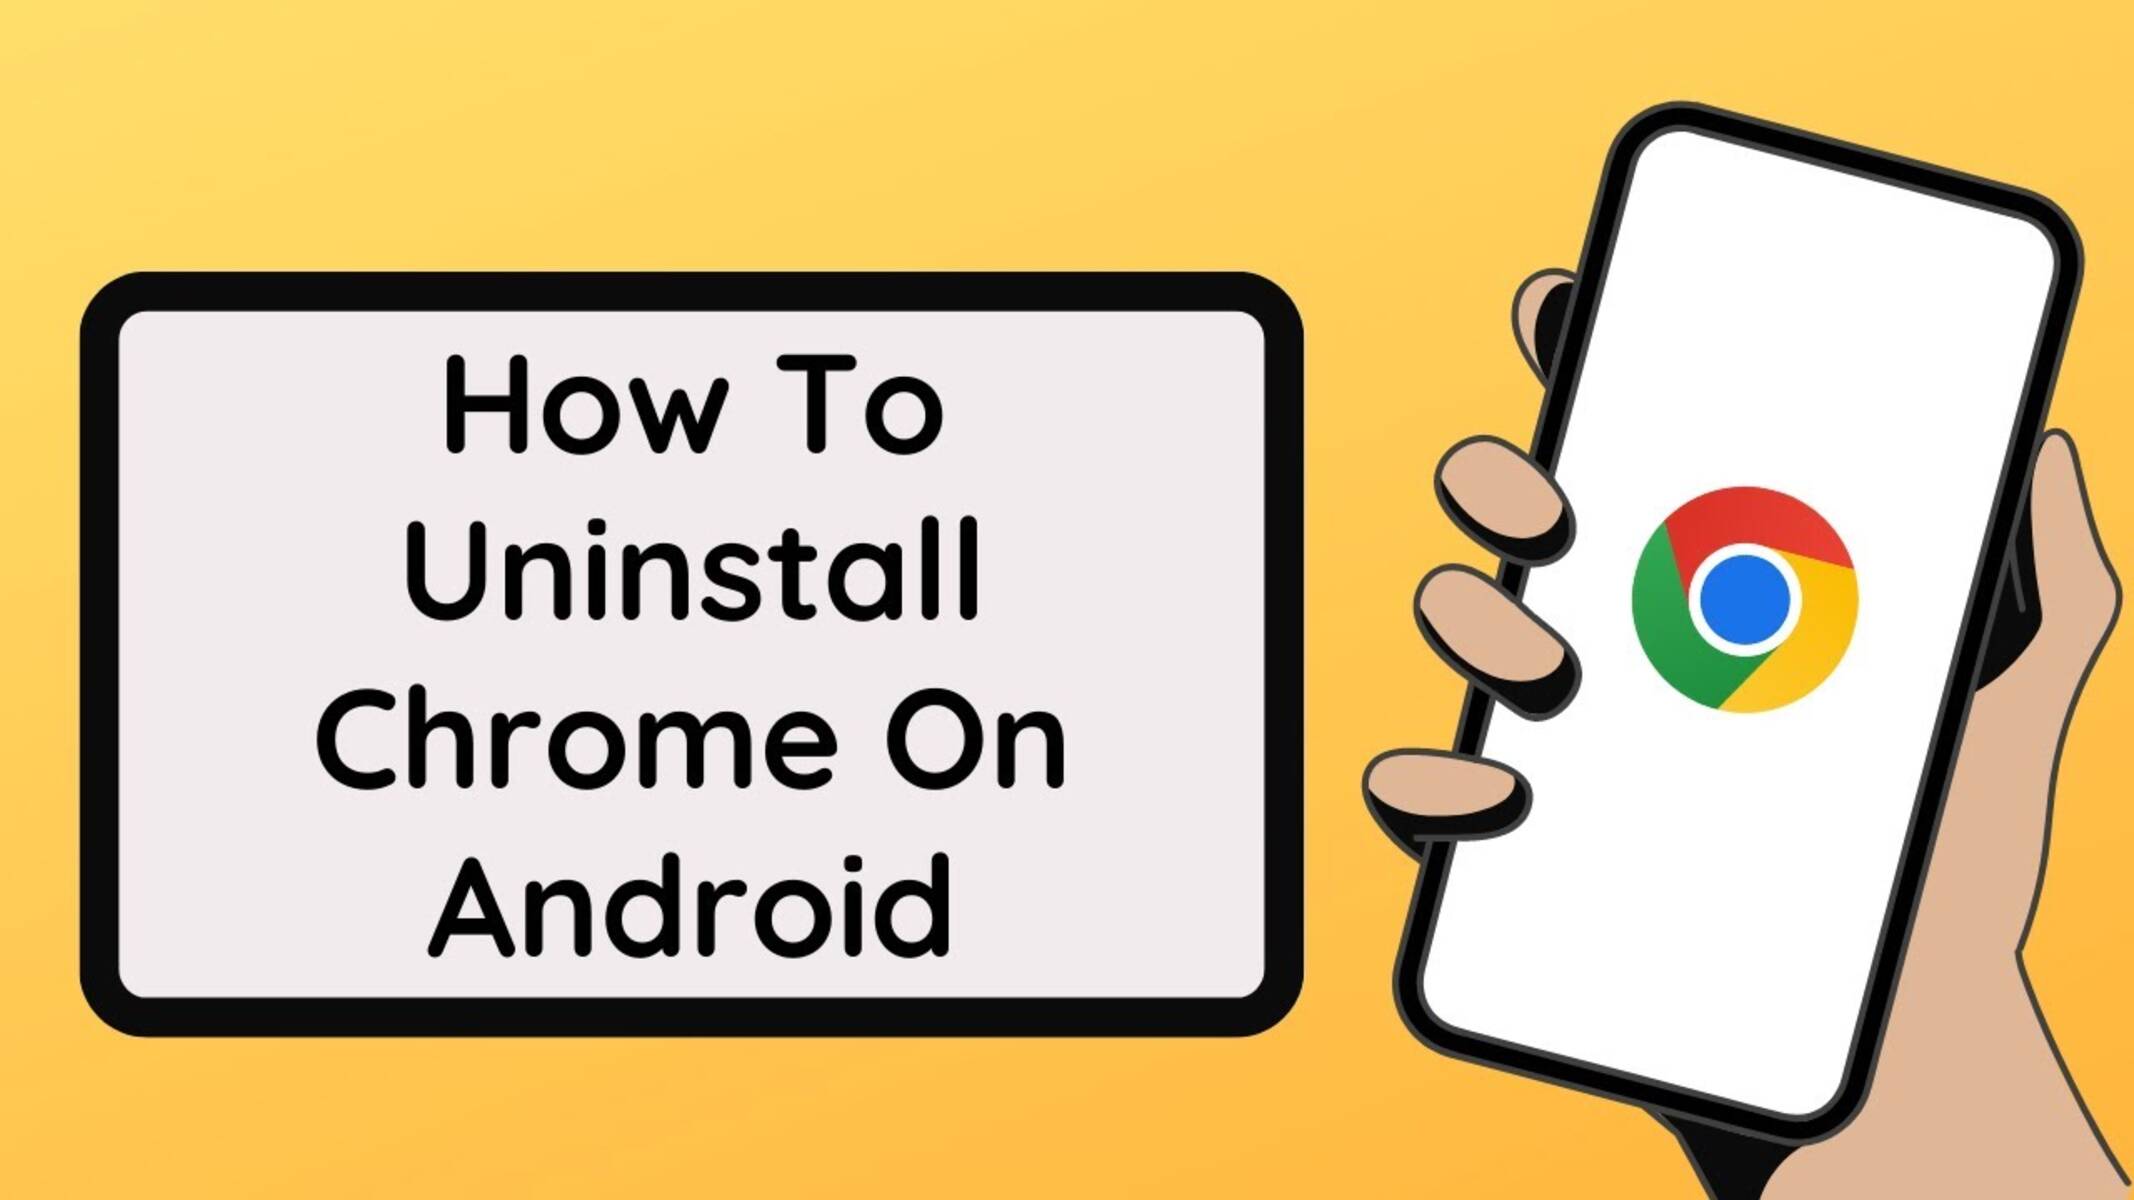 How To Uninstall Chrome On Android